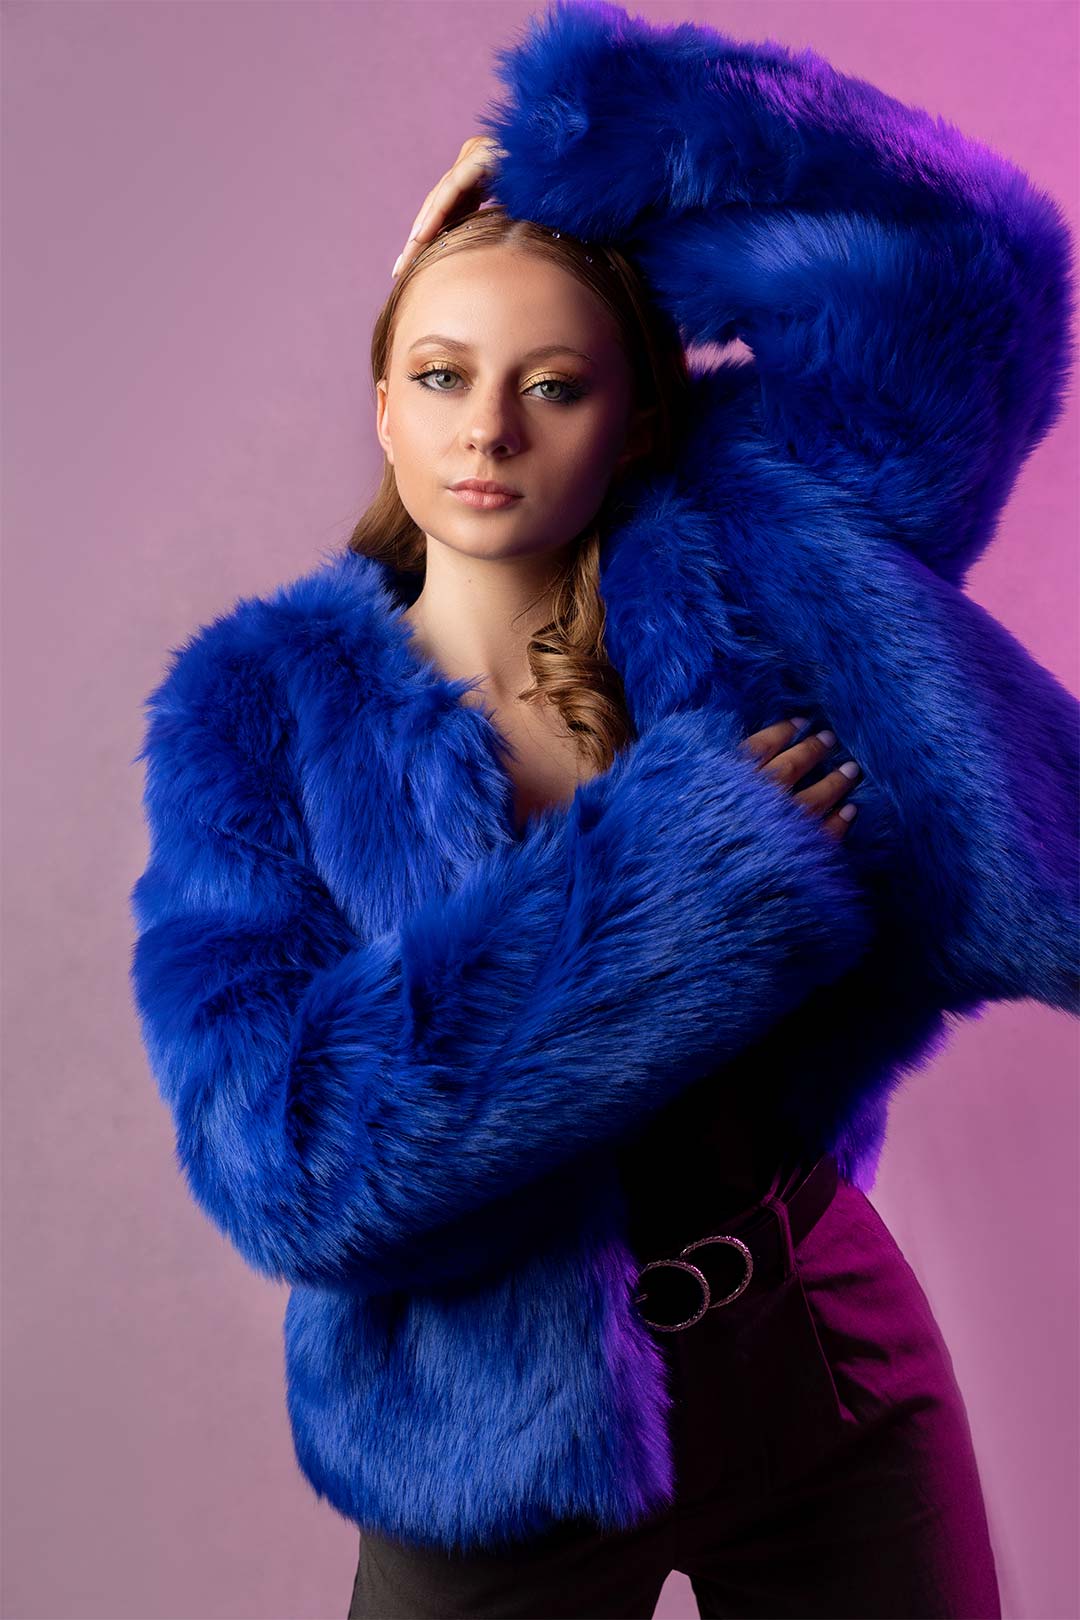 Dramatic studio portrait of a high school senior girl wearing a blue fur coat in front of a purple background